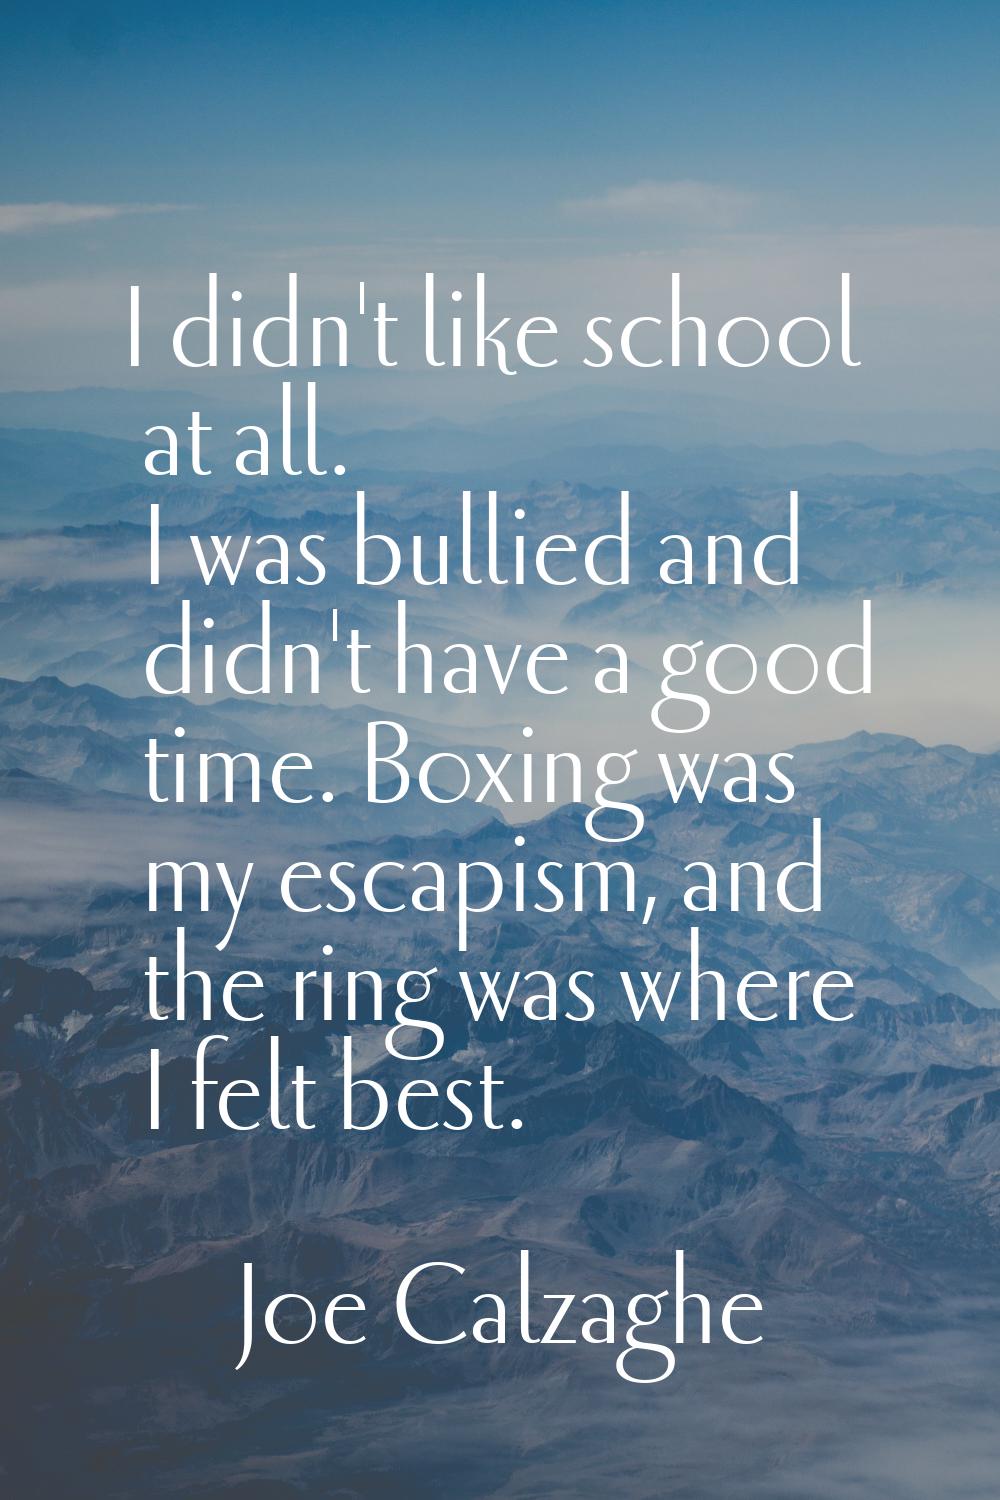 I didn't like school at all. I was bullied and didn't have a good time. Boxing was my escapism, and